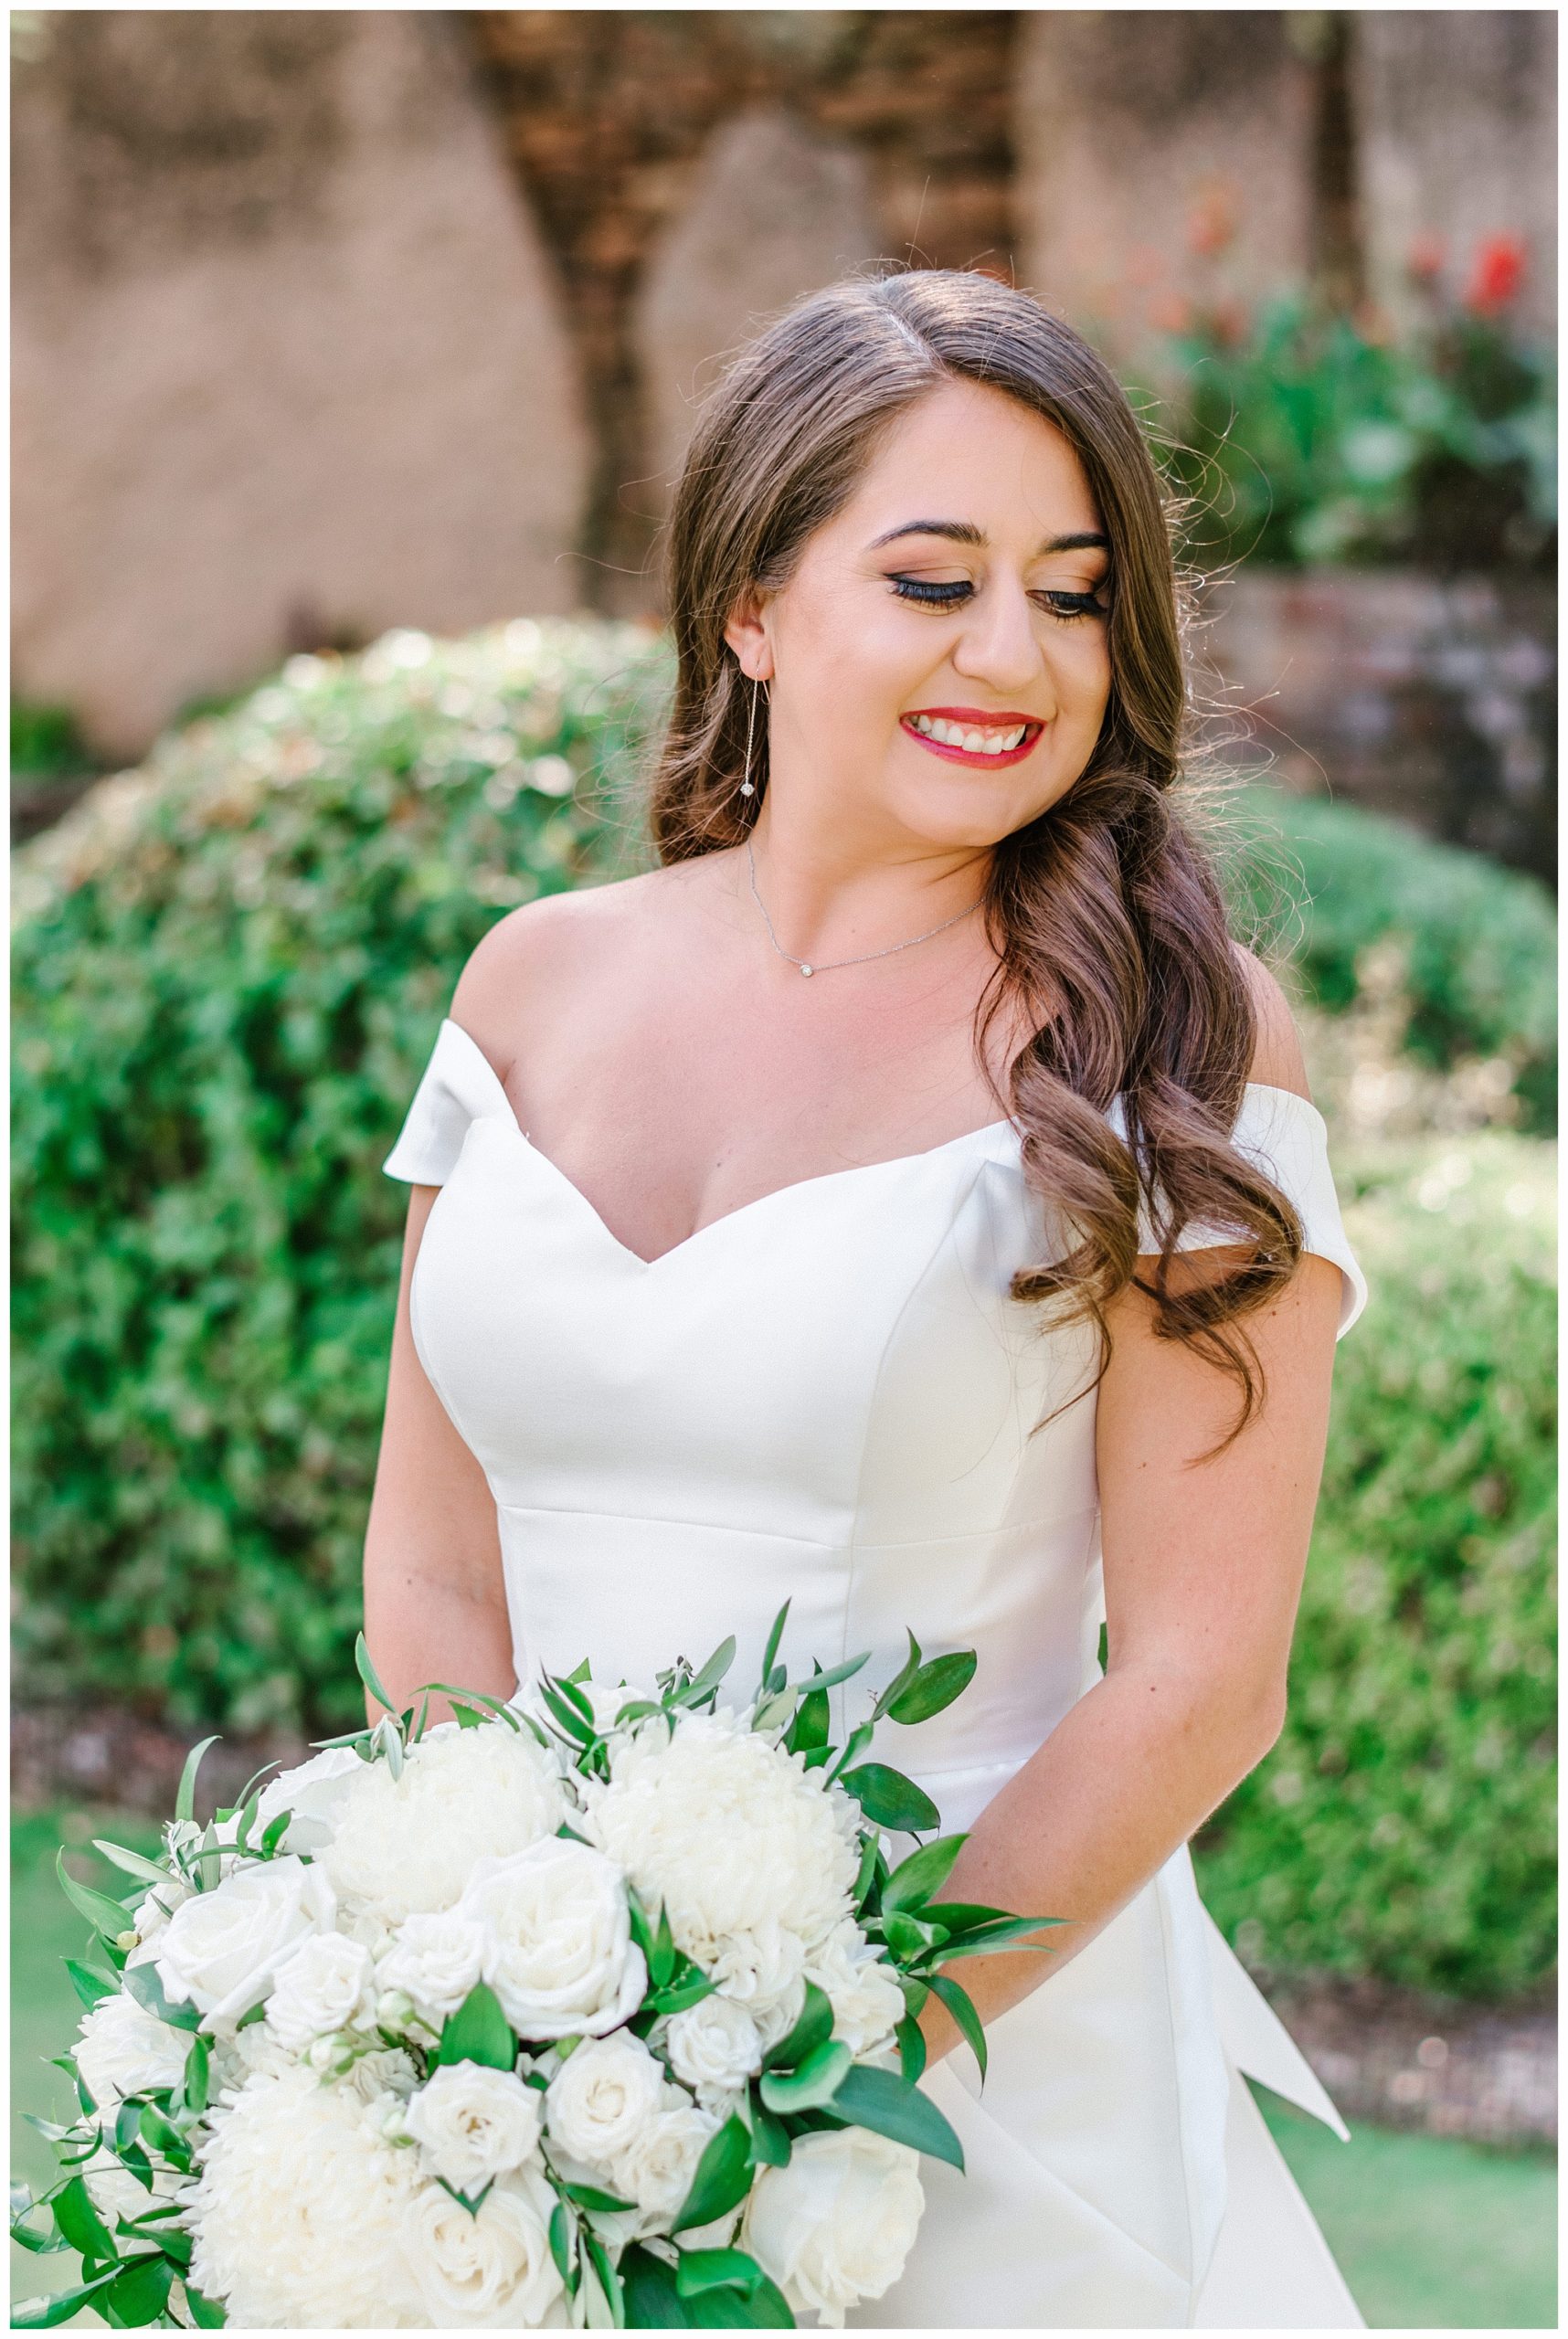 Stylish and Chic Bride on her Wedding Day